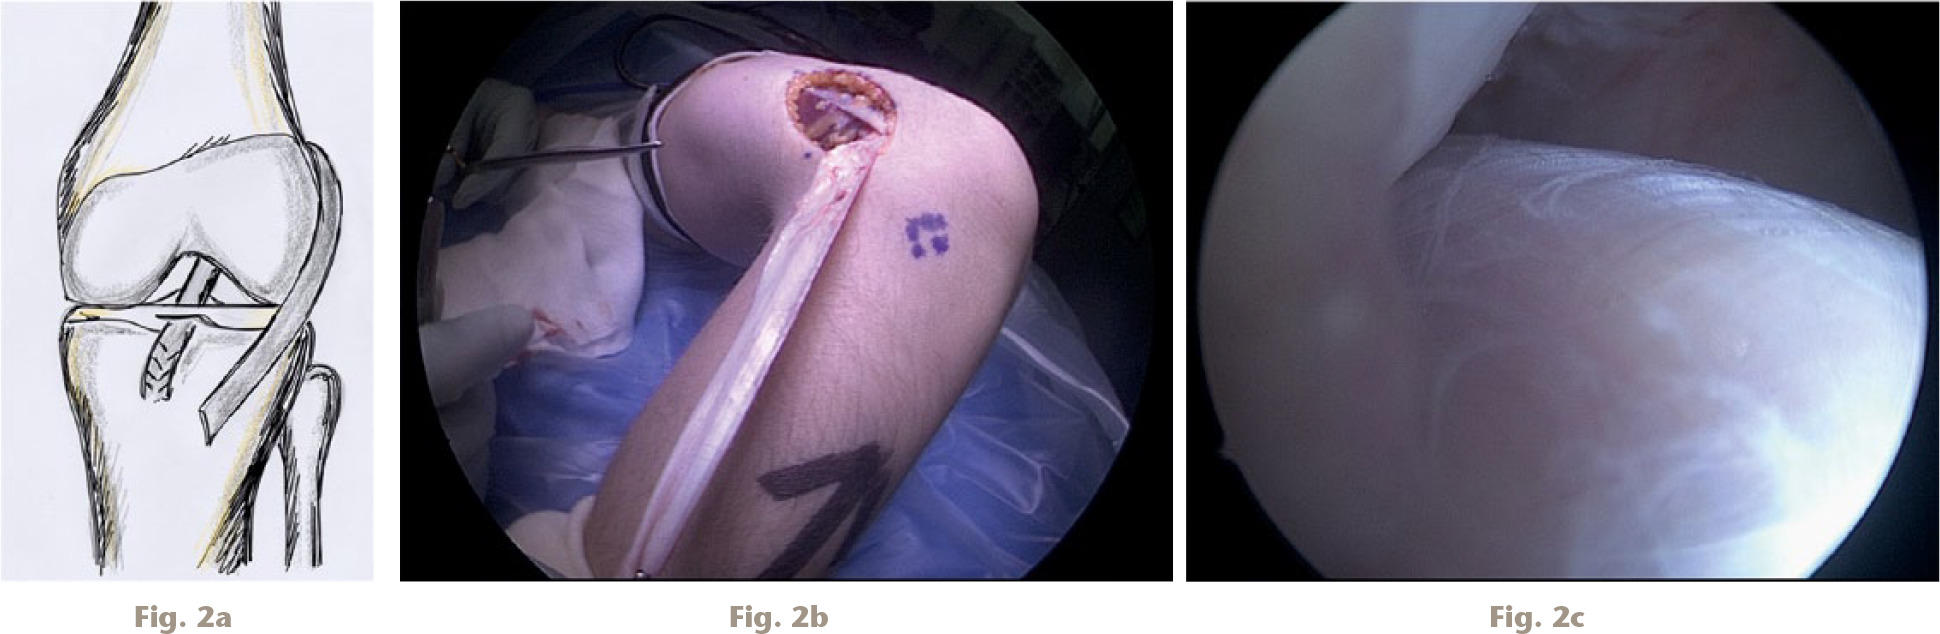 Fig. 2 
          a) Extra-articular reconstruction, b) harvesting of iliotibial band (ITB), and c) ITB graft in situ entering posterior to femoral condyle.
        